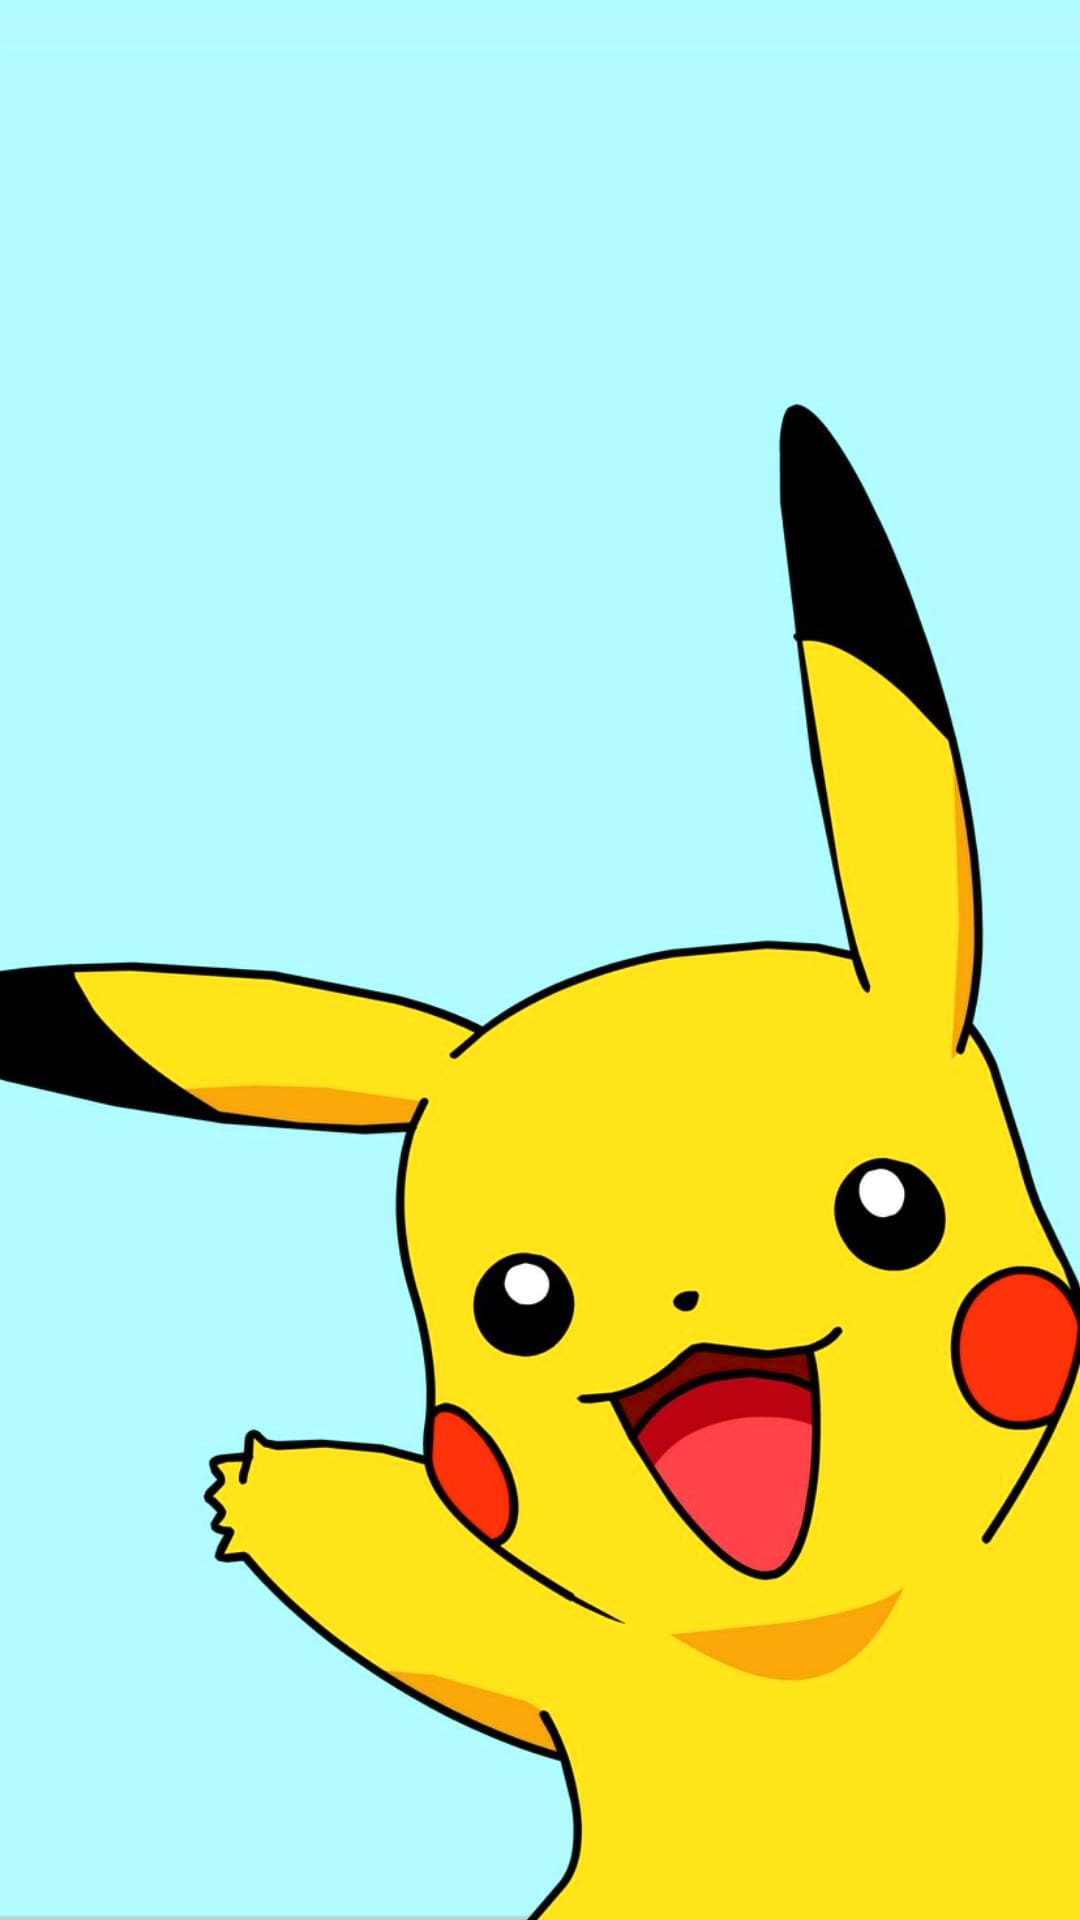 A cute pikachu is shown in this image - Pikachu